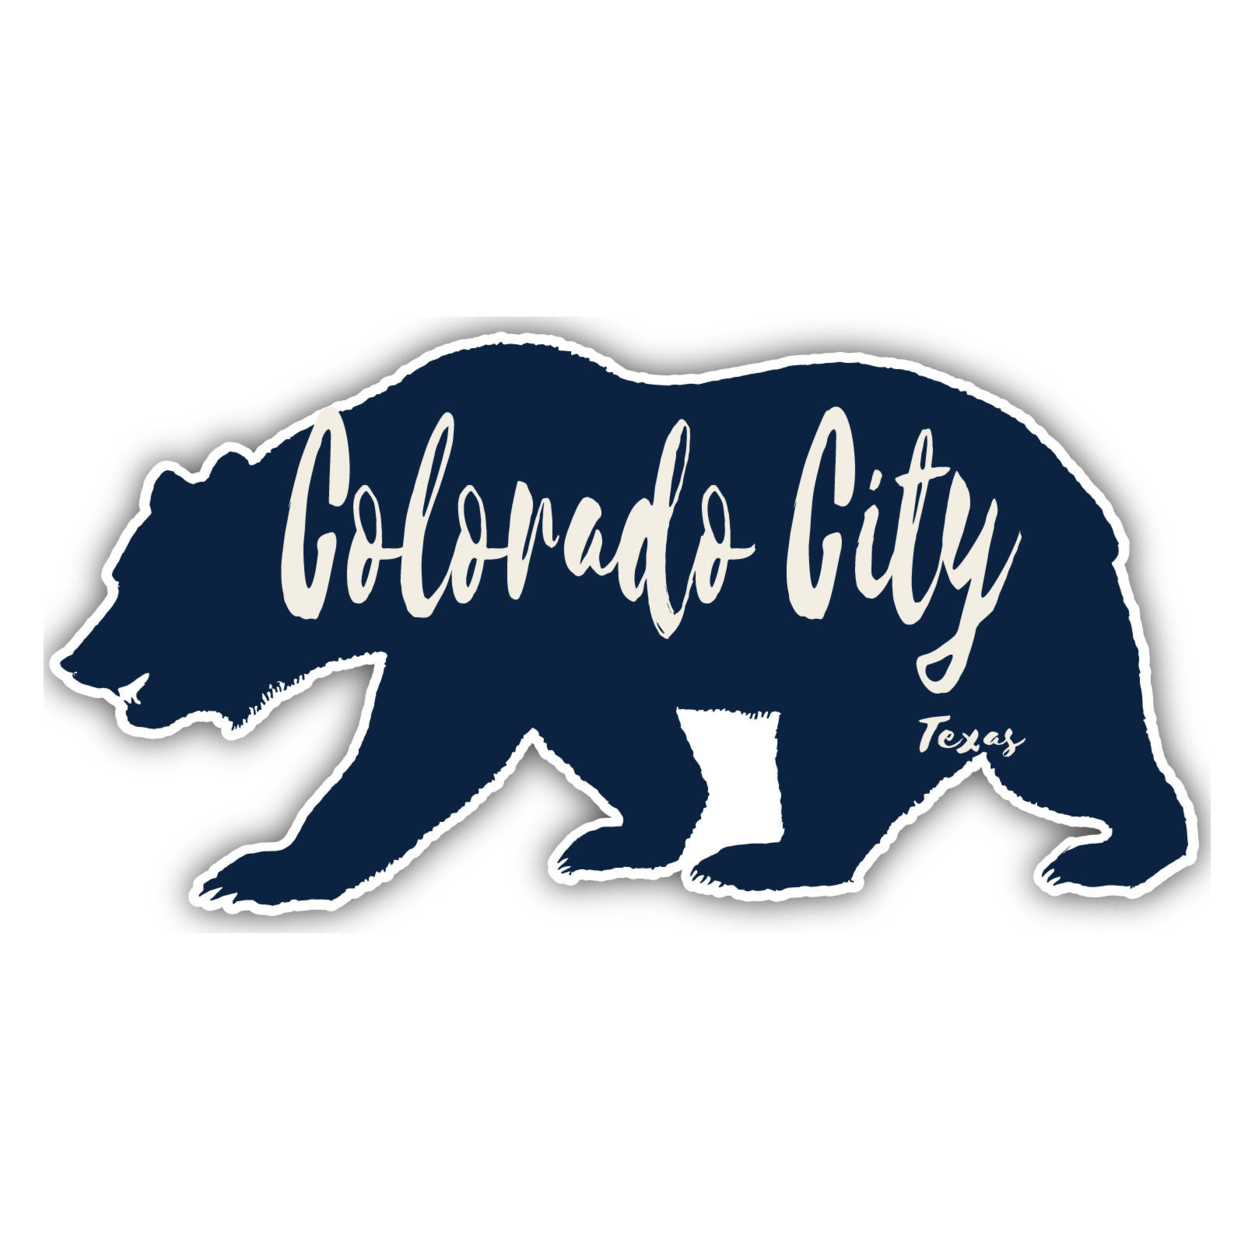 Colorado City Texas Souvenir Decorative Stickers (Choose Theme And Size) - 4-Pack, 12-Inch, Great Outdoors